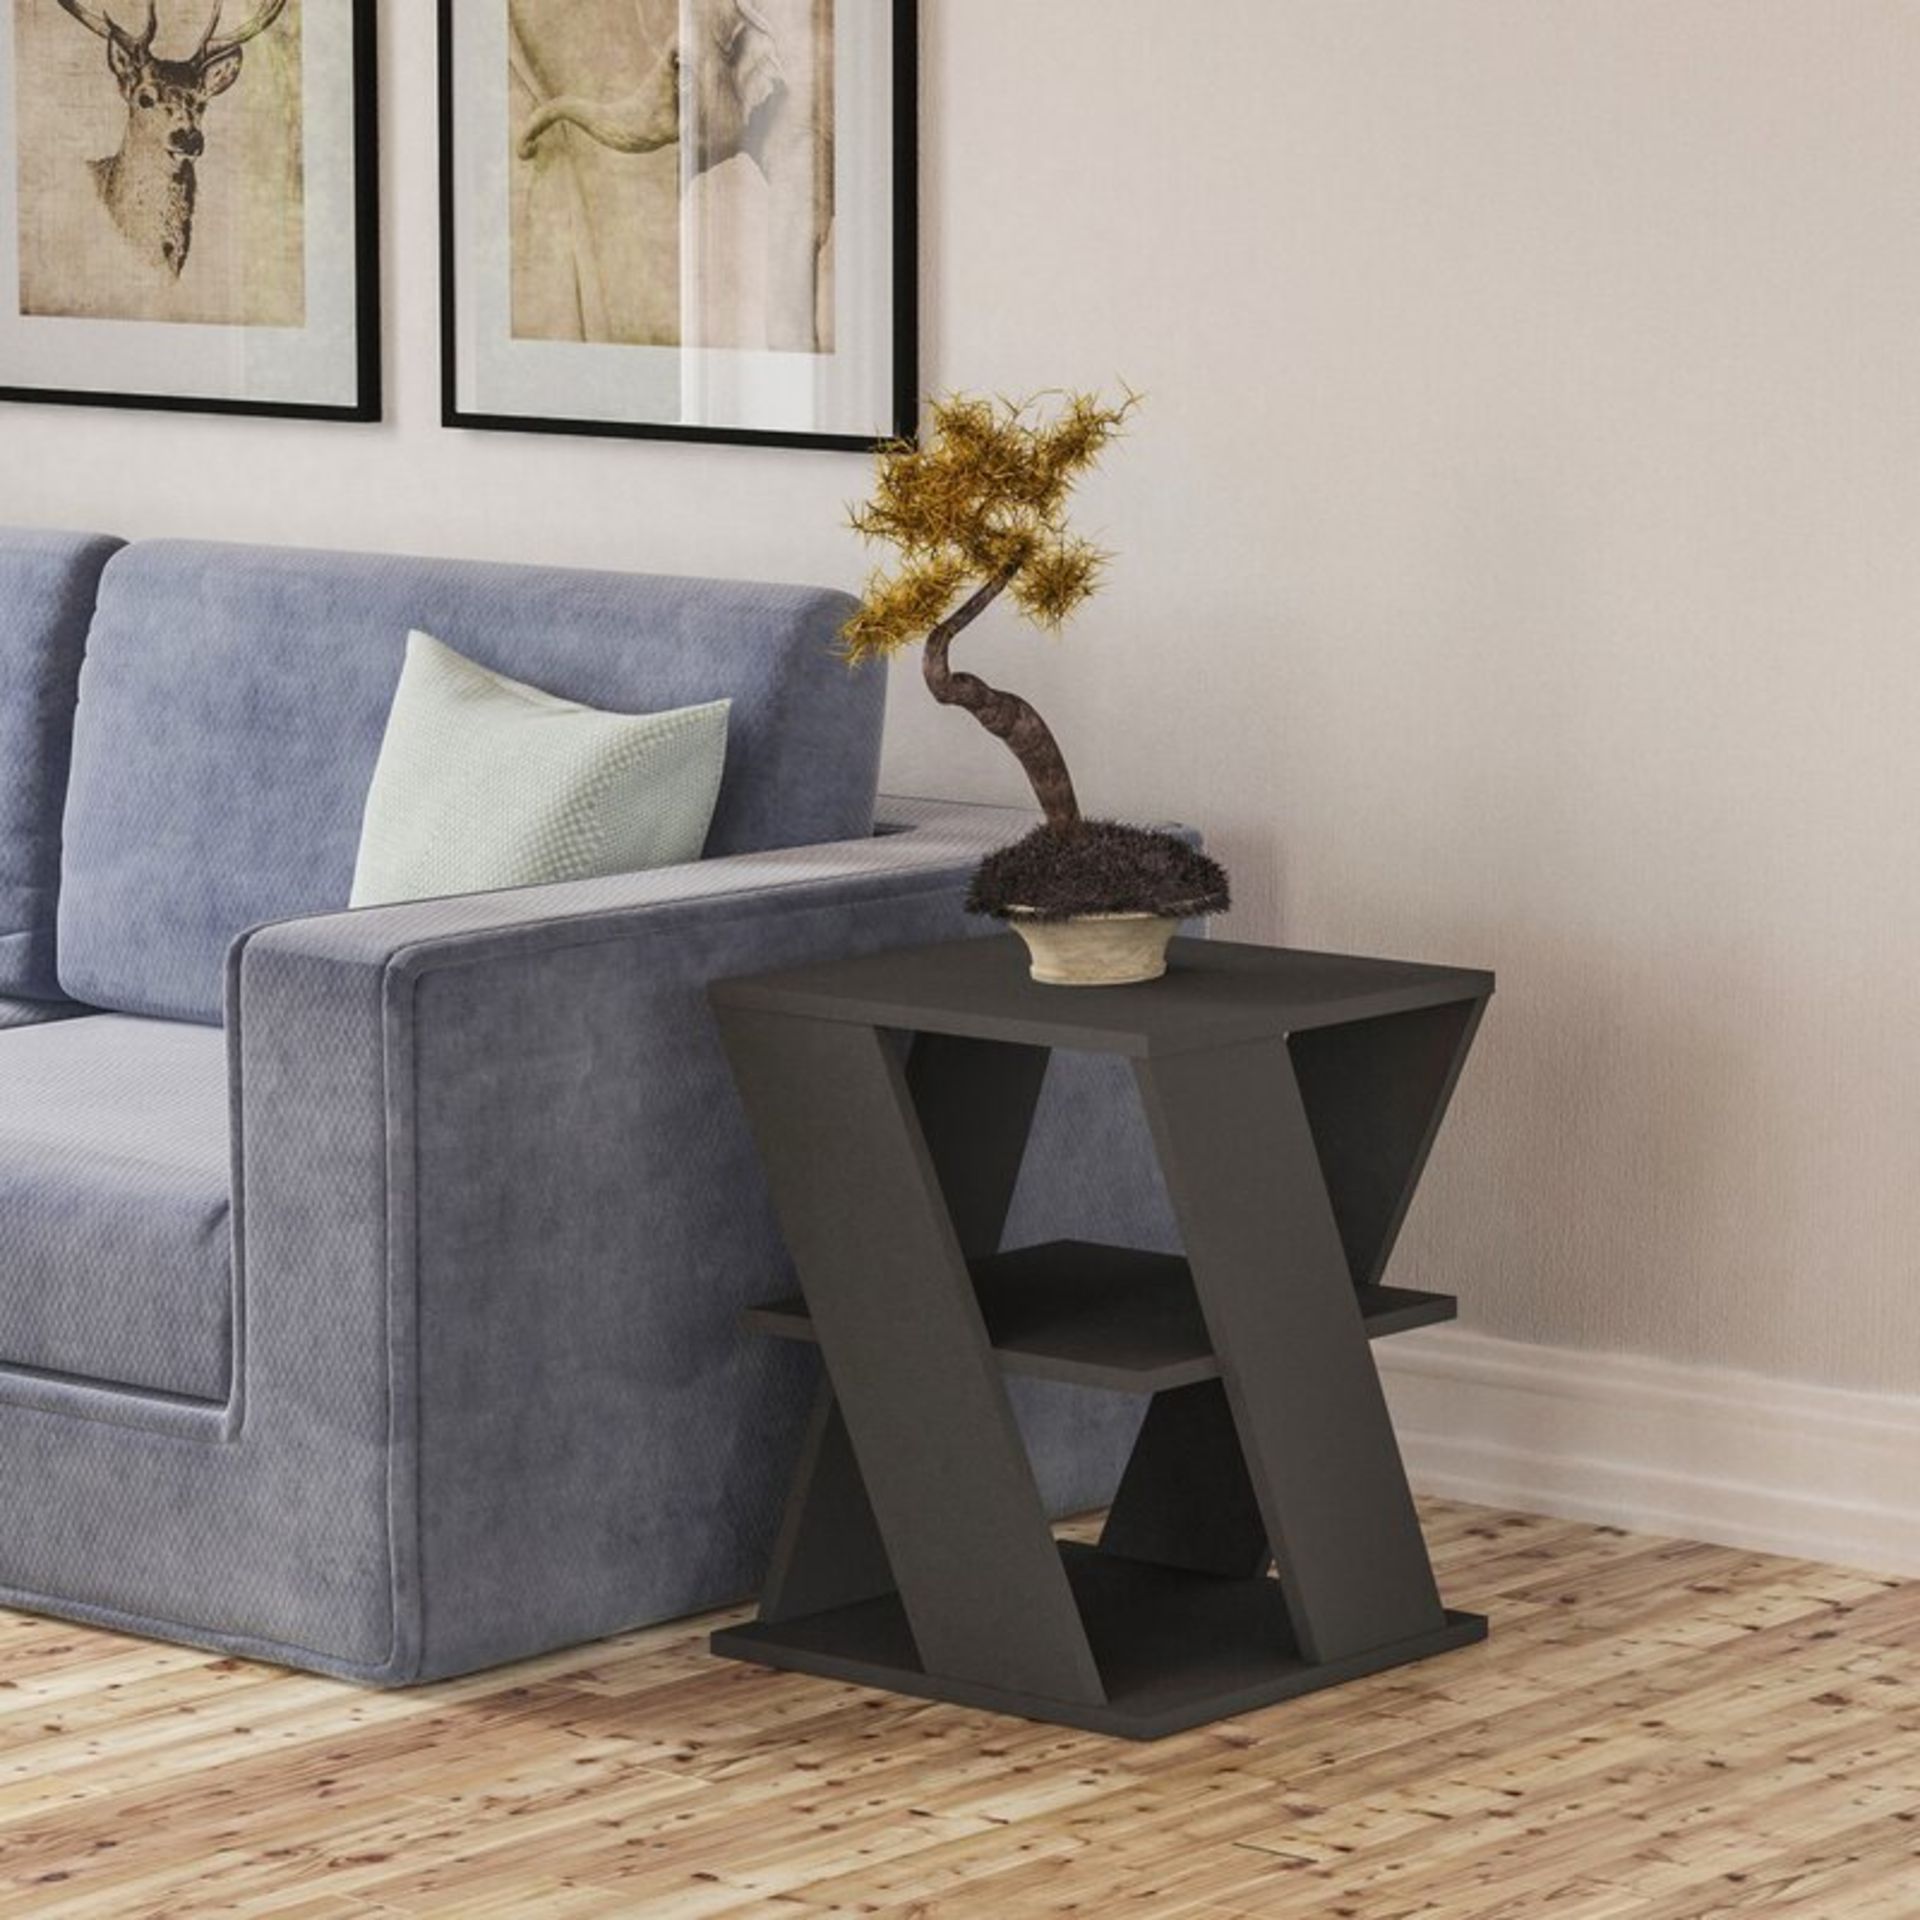 Cateline Side Table with Storage - RRP £112.00